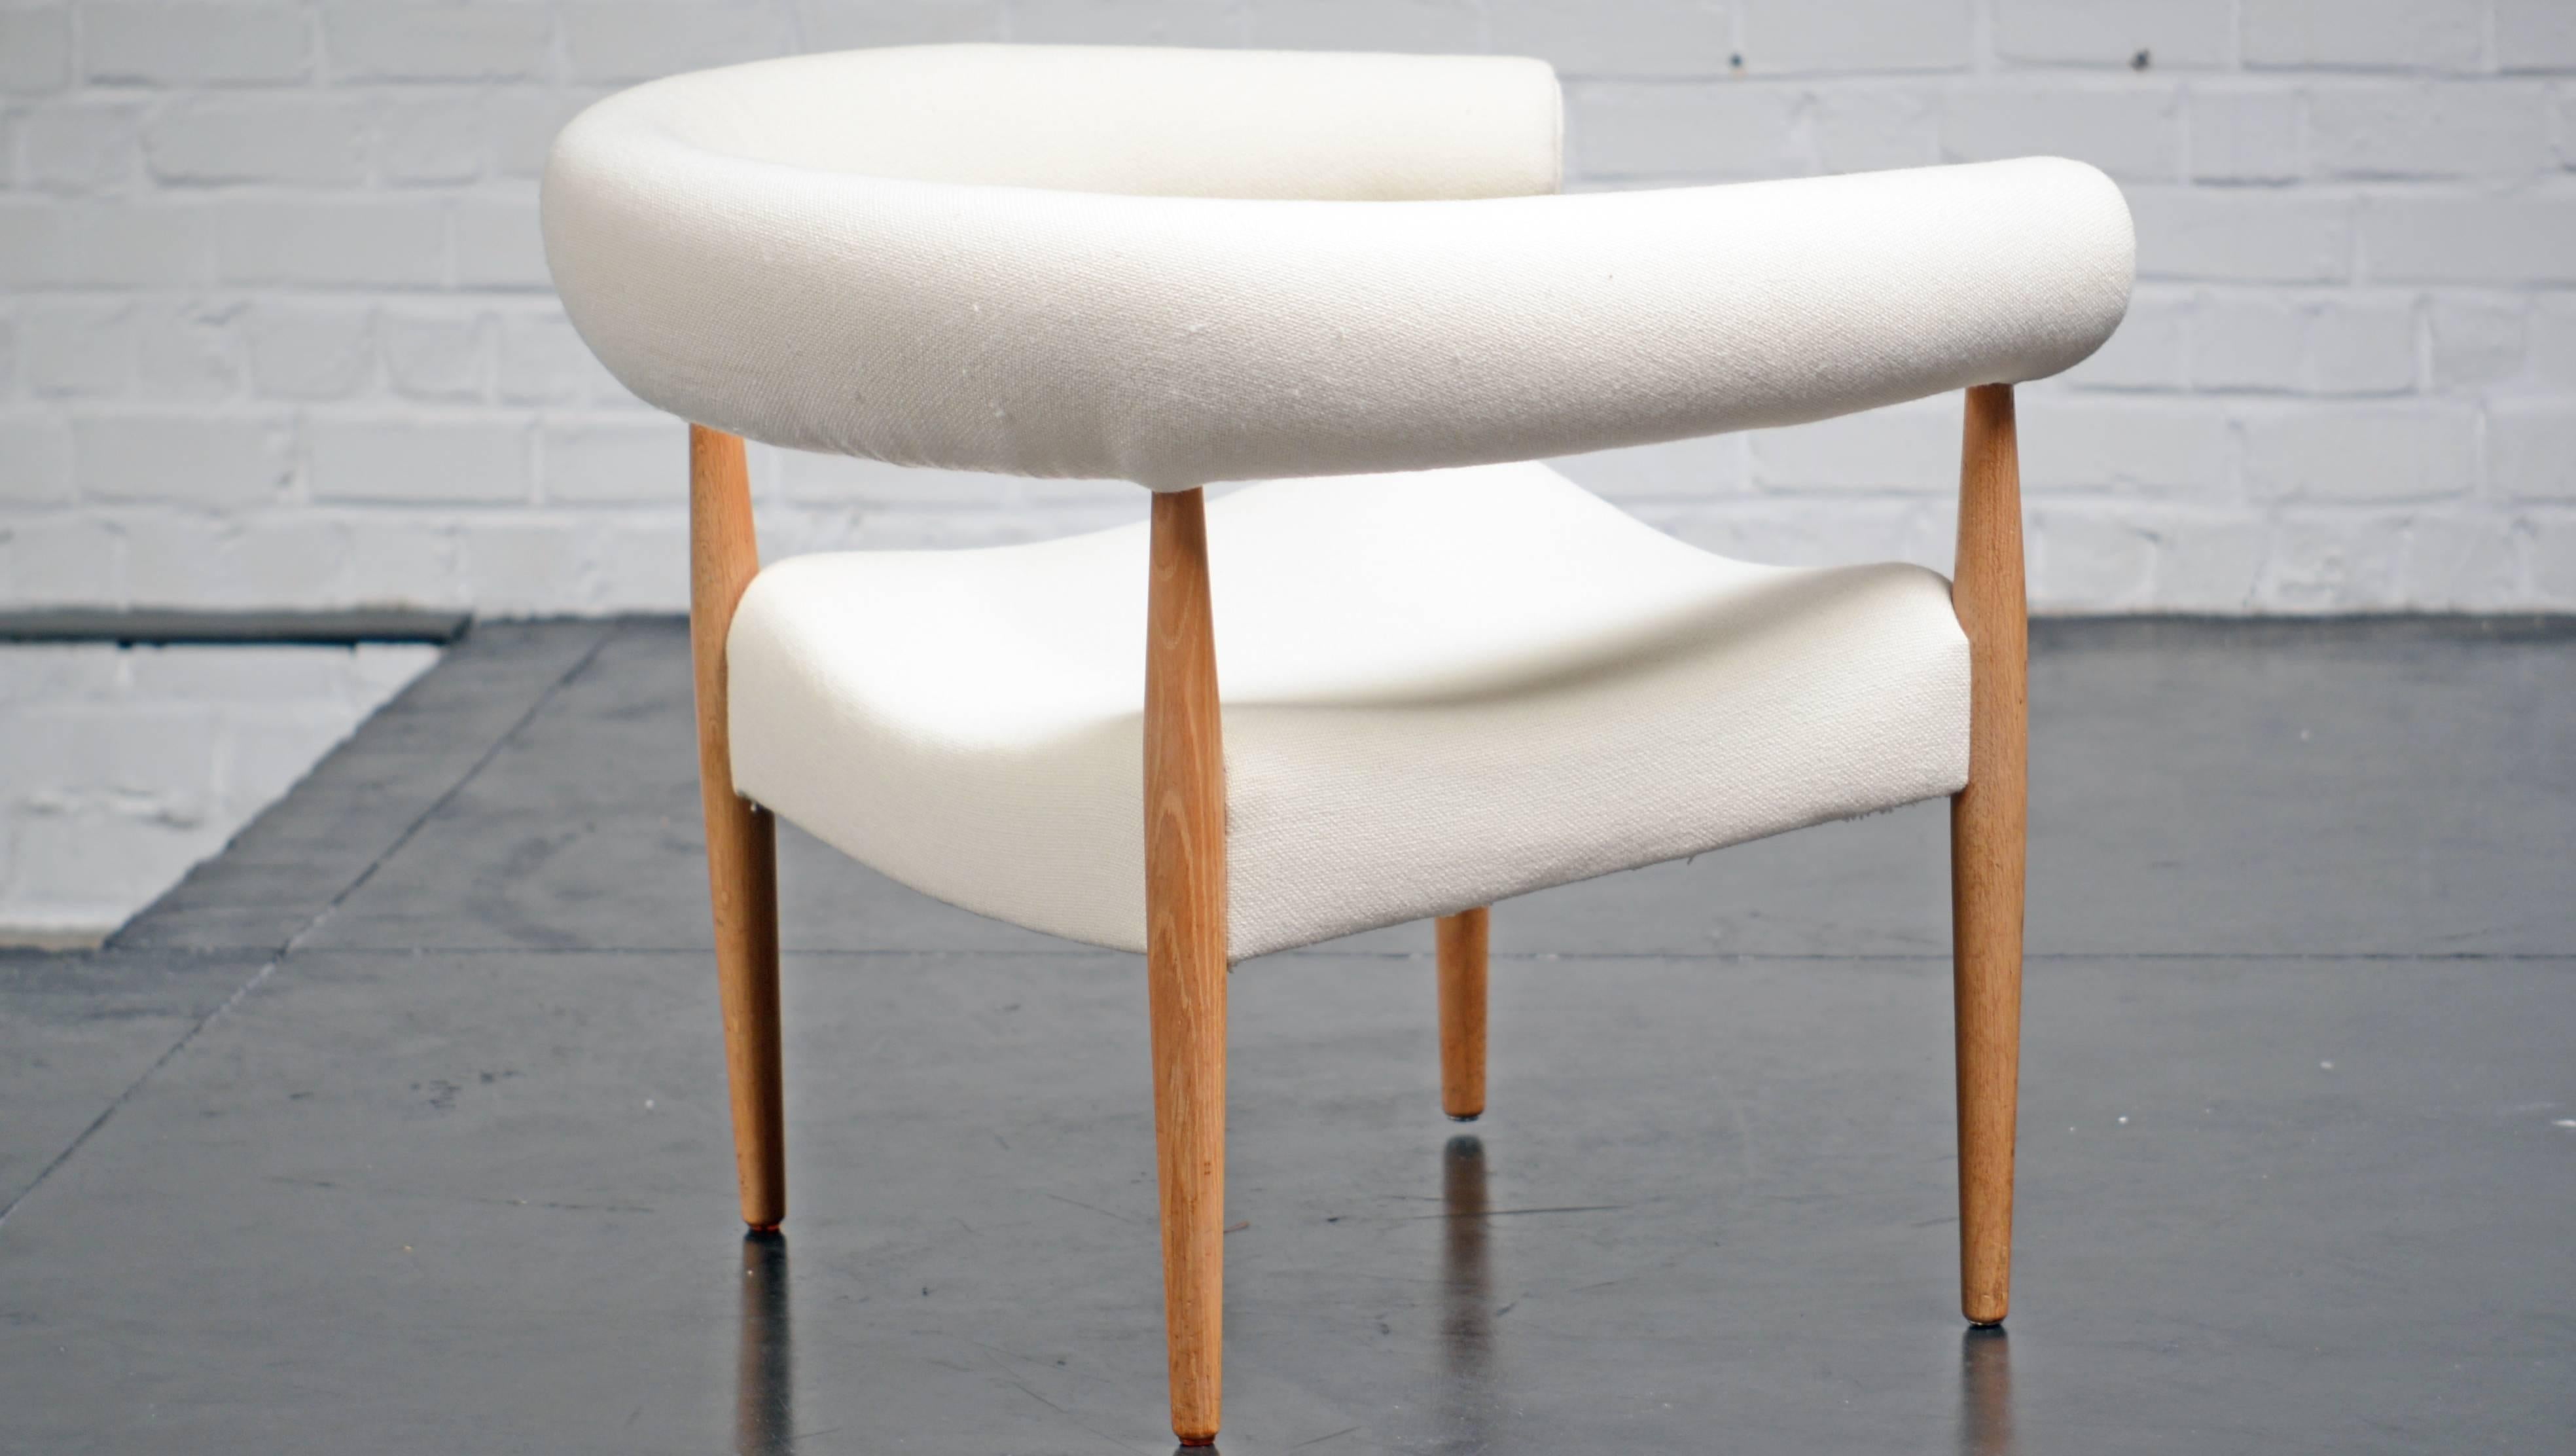 Scandinavian Modern Nanna Ditzel Pair of Sausage Easy Chairs Made by Kolds Savværk, 1958 For Sale